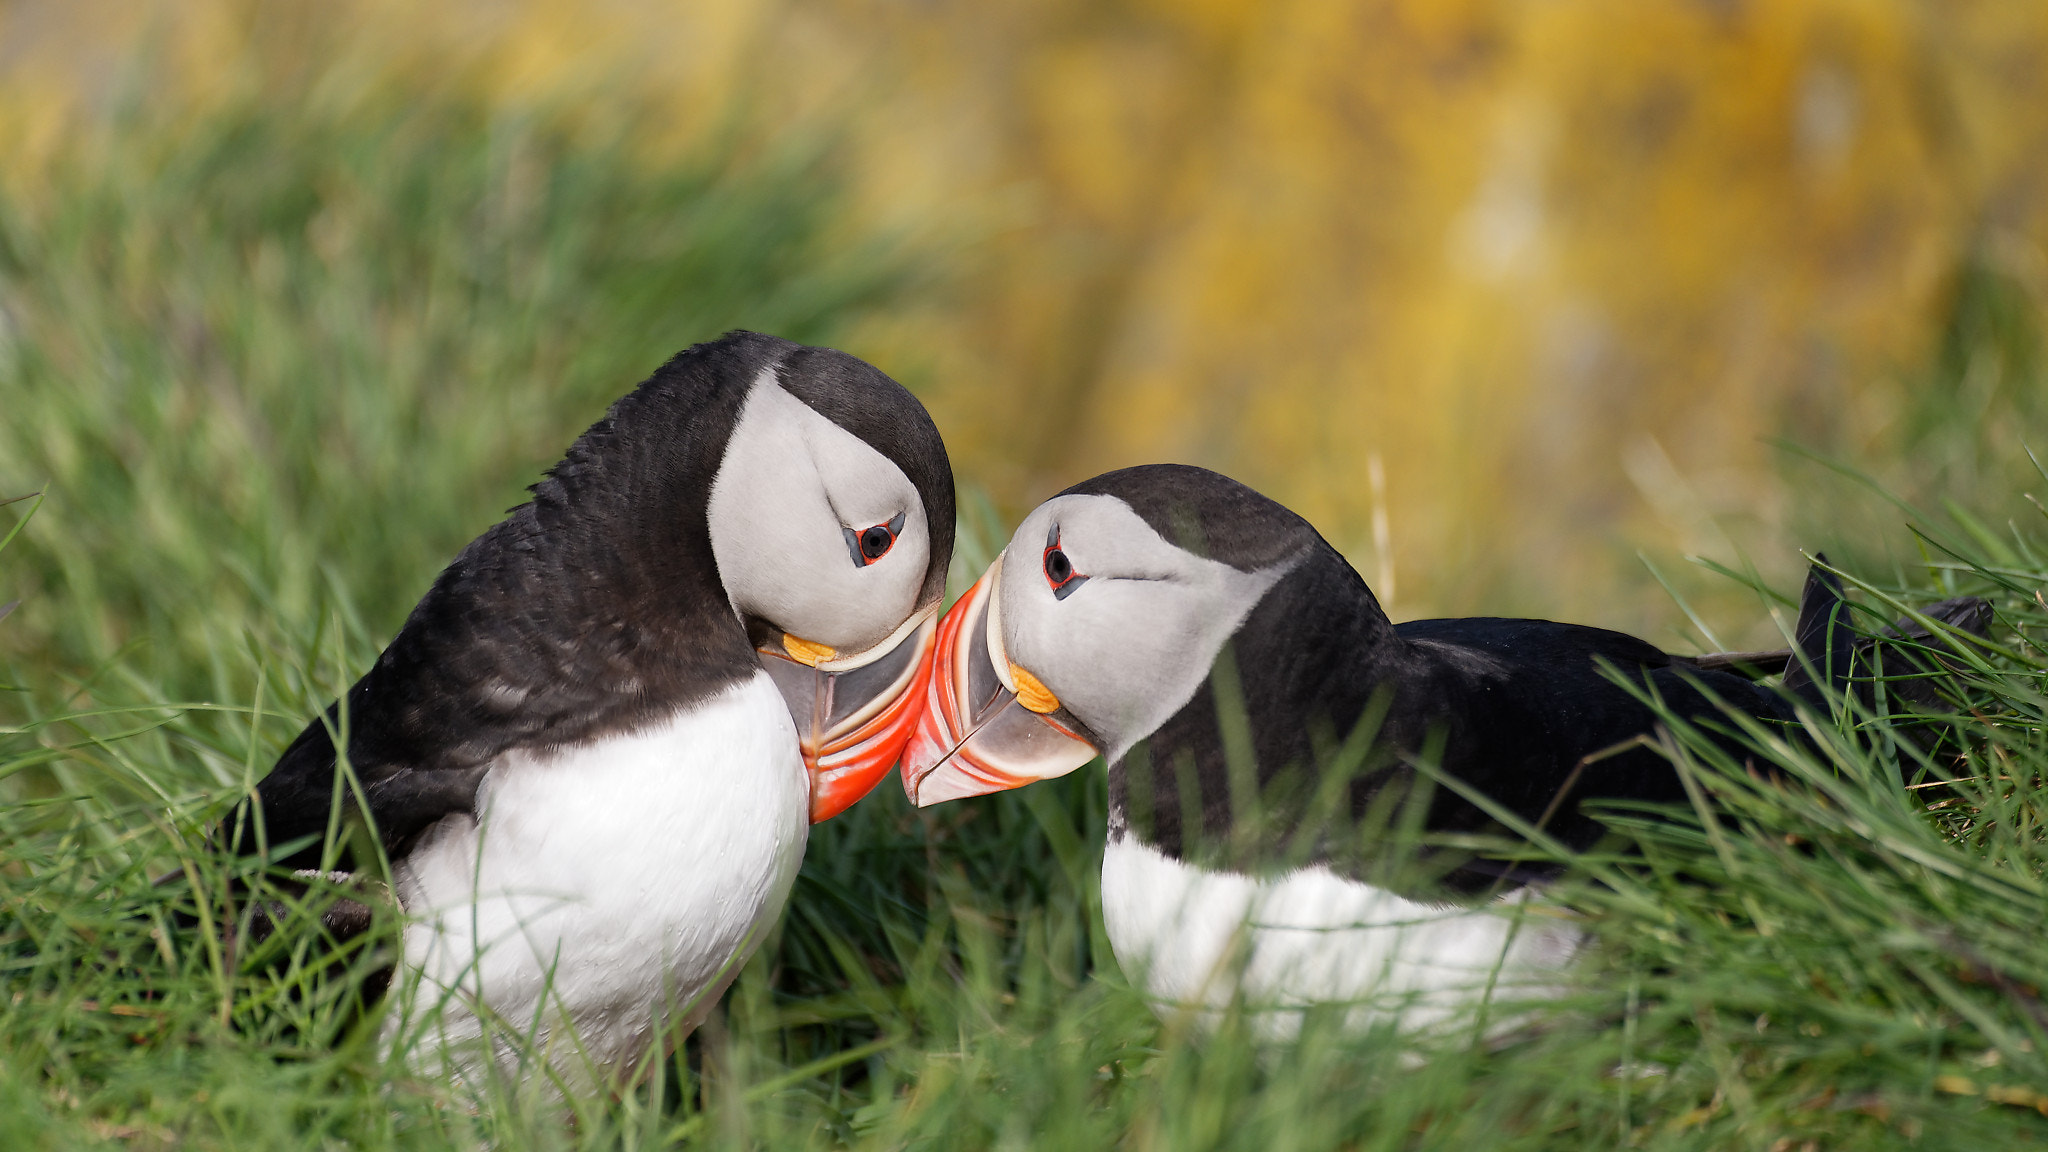 Nikon D750 + Sigma 150-600mm F5-6.3 DG OS HSM | C sample photo. Cooing puffins photography